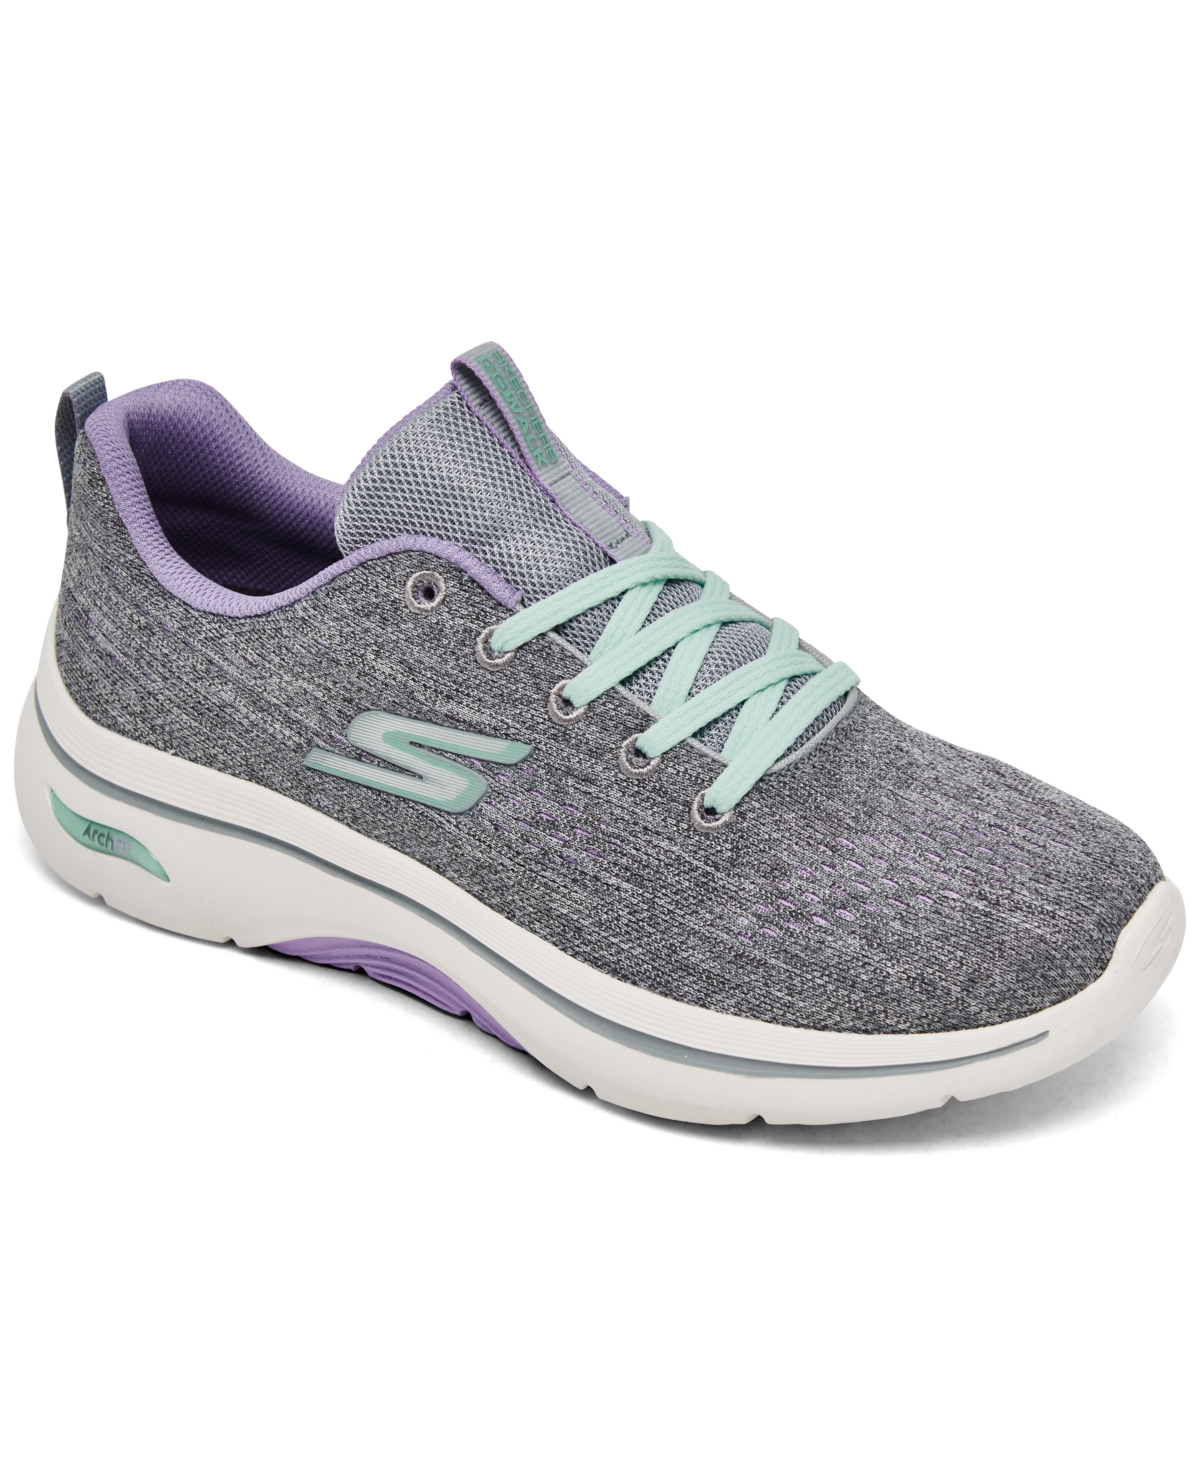 Women's Go Walk Arch Fit 2.0 - Vivid Sunset Walking Sneakers from Finish Line - Gray/lavender